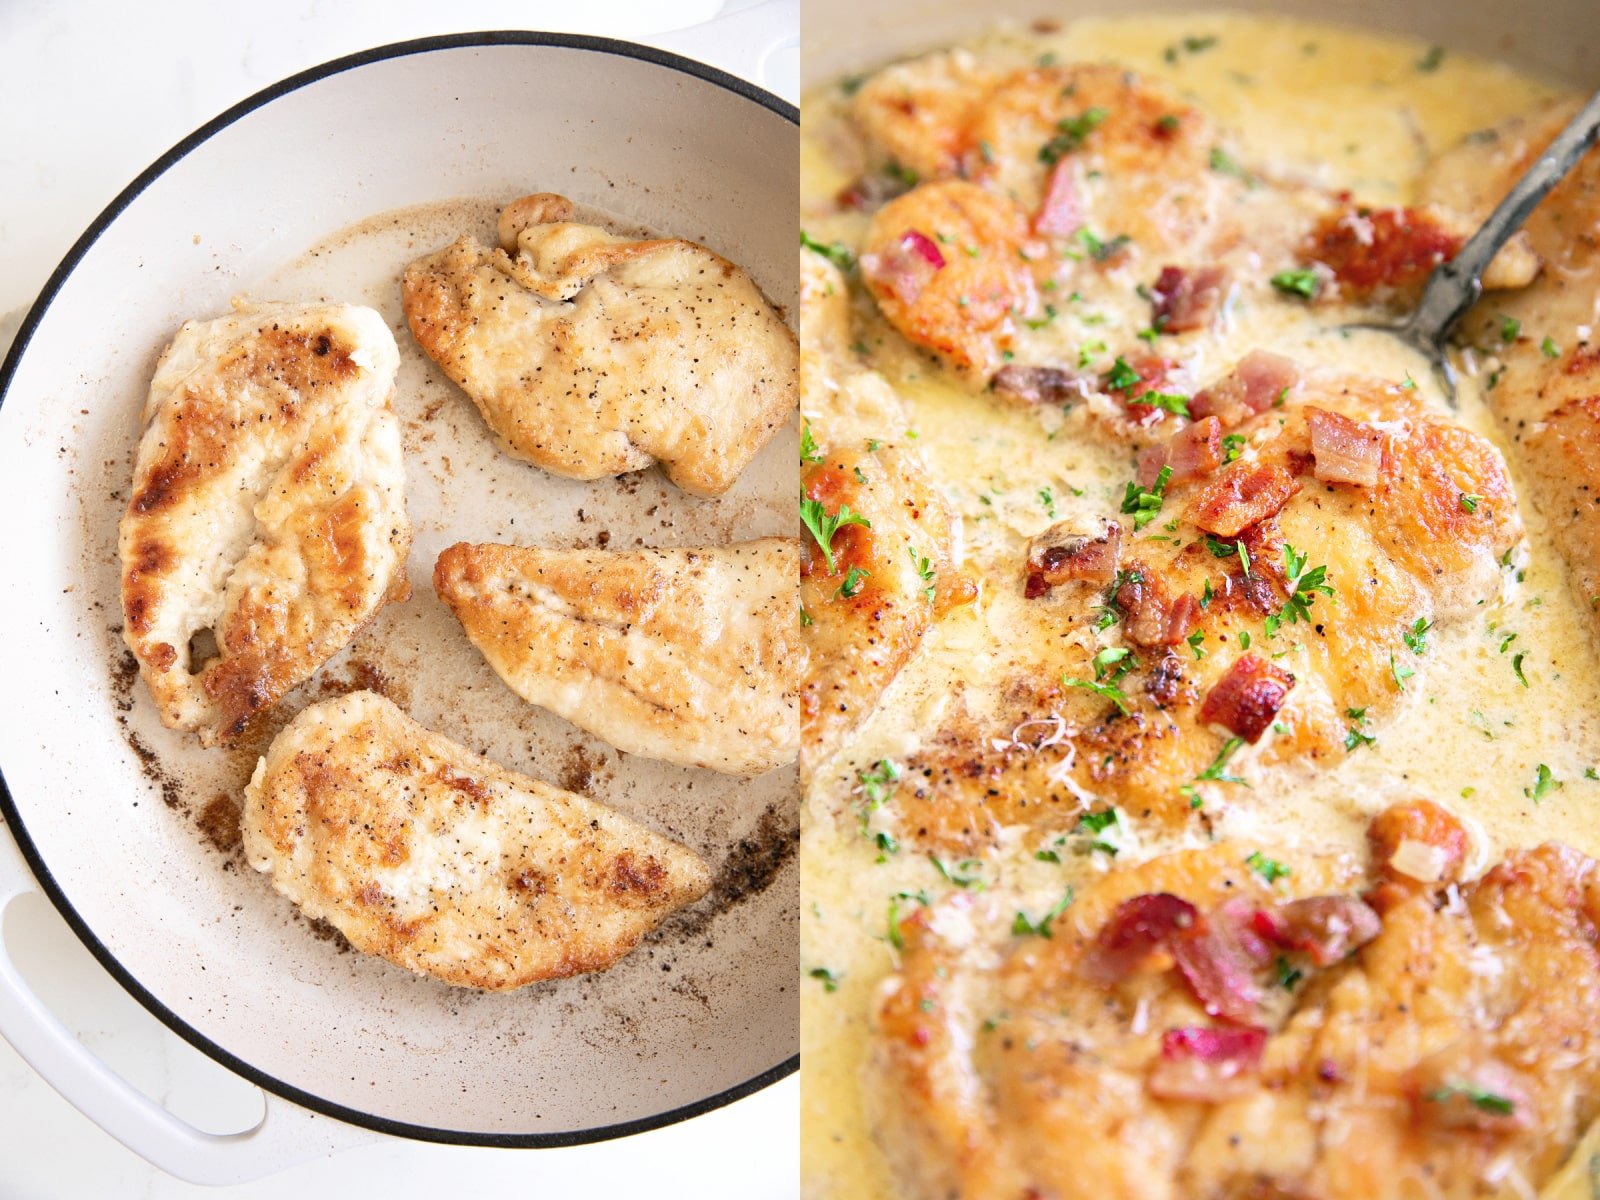 Two images side by side in a collage: the first image shows four chicken breasts cooking in a pan and the second image shows the complete recipe of chicken in a creamy bacon sauce.